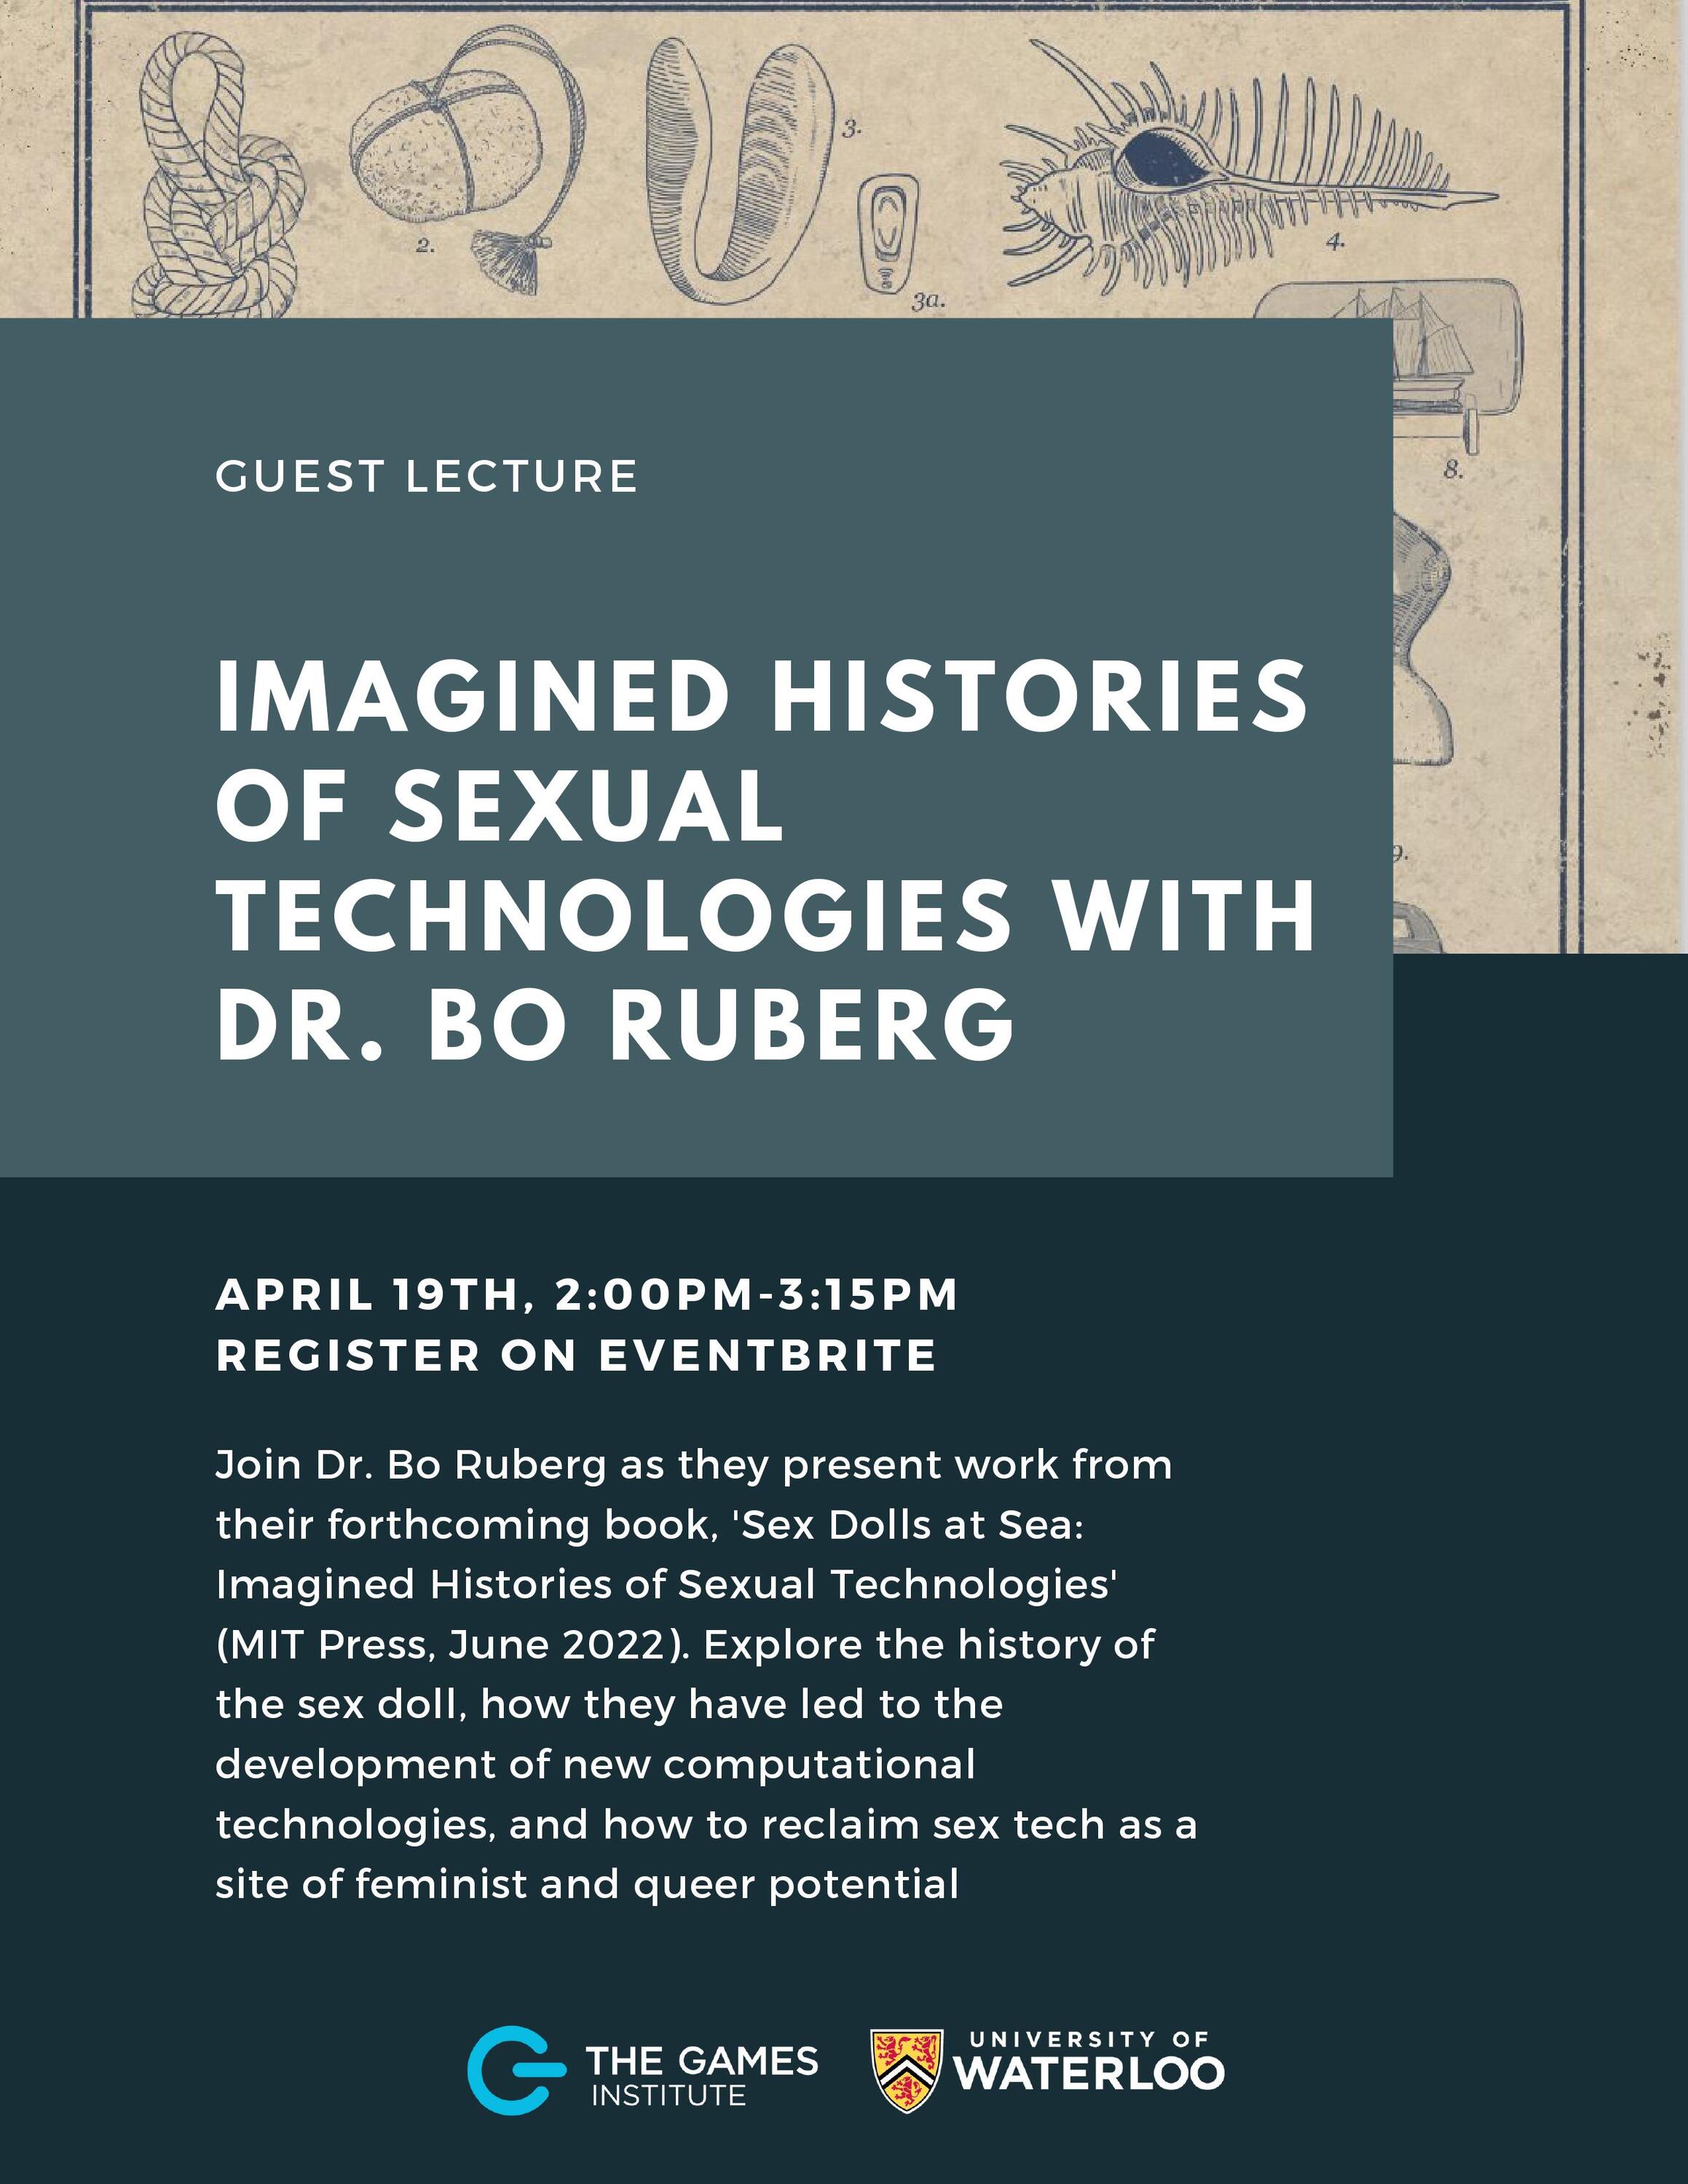 Poster for imagined histories of sexual technologies with Dr. Bo Ruberg